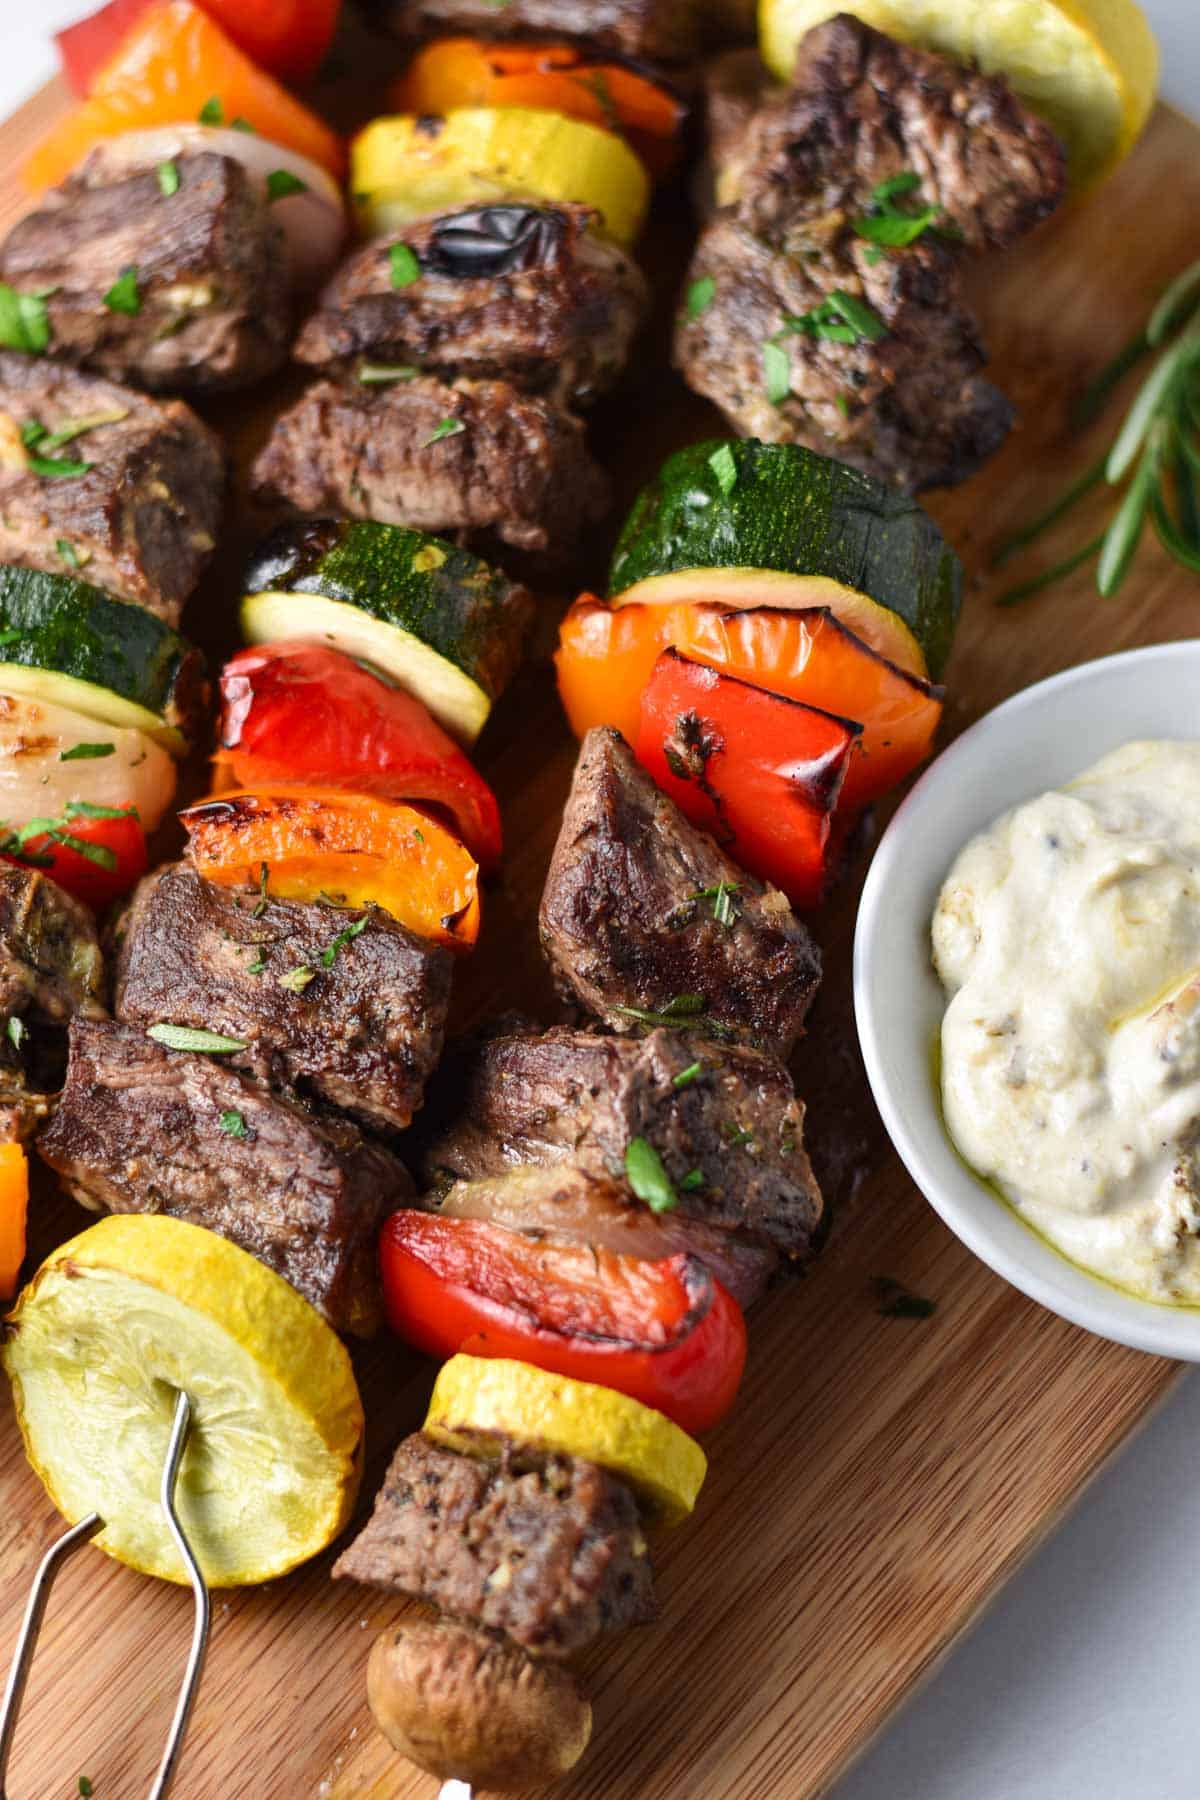 Three beef and vegetable skewers on a wood board next to a dip and rosemary.